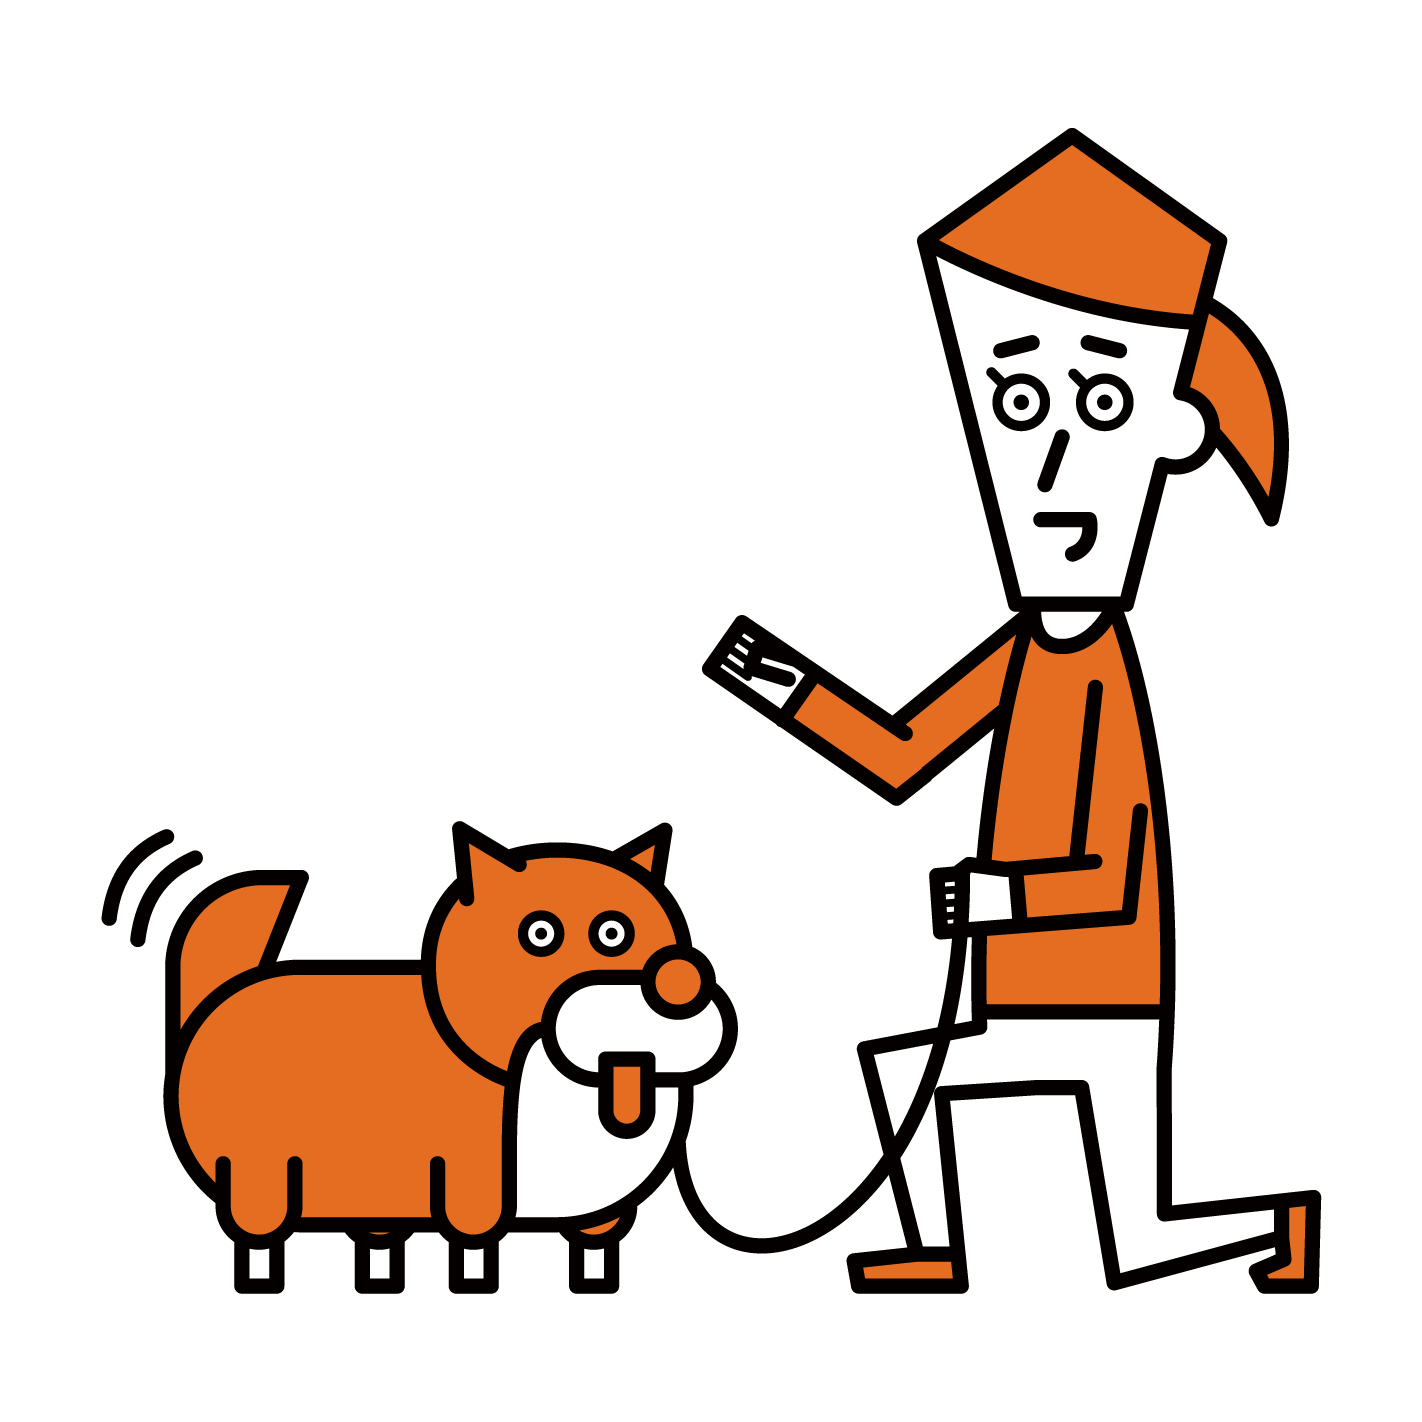 Illustration of a person (woman) who disciplines a dog